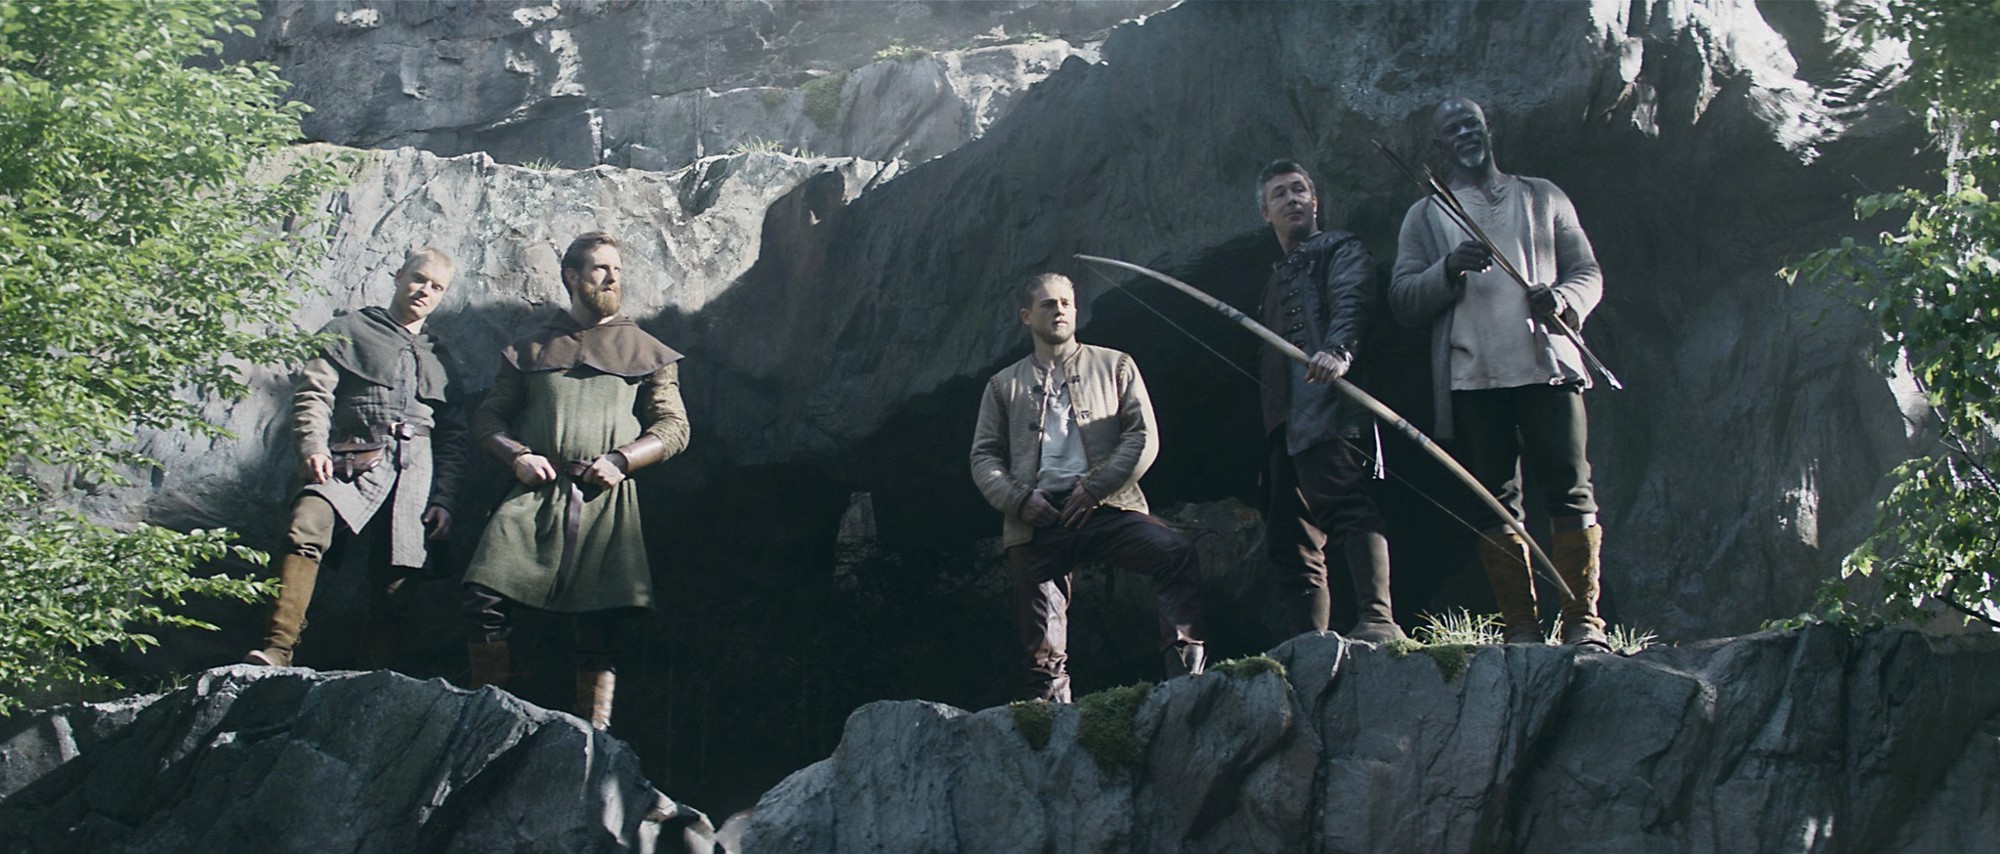 Charlie Hunnam, Aidan Gillen and Djimon Hounsou in Warner Bros. Pictures' King Arthur: Legend of the Sword (2017)